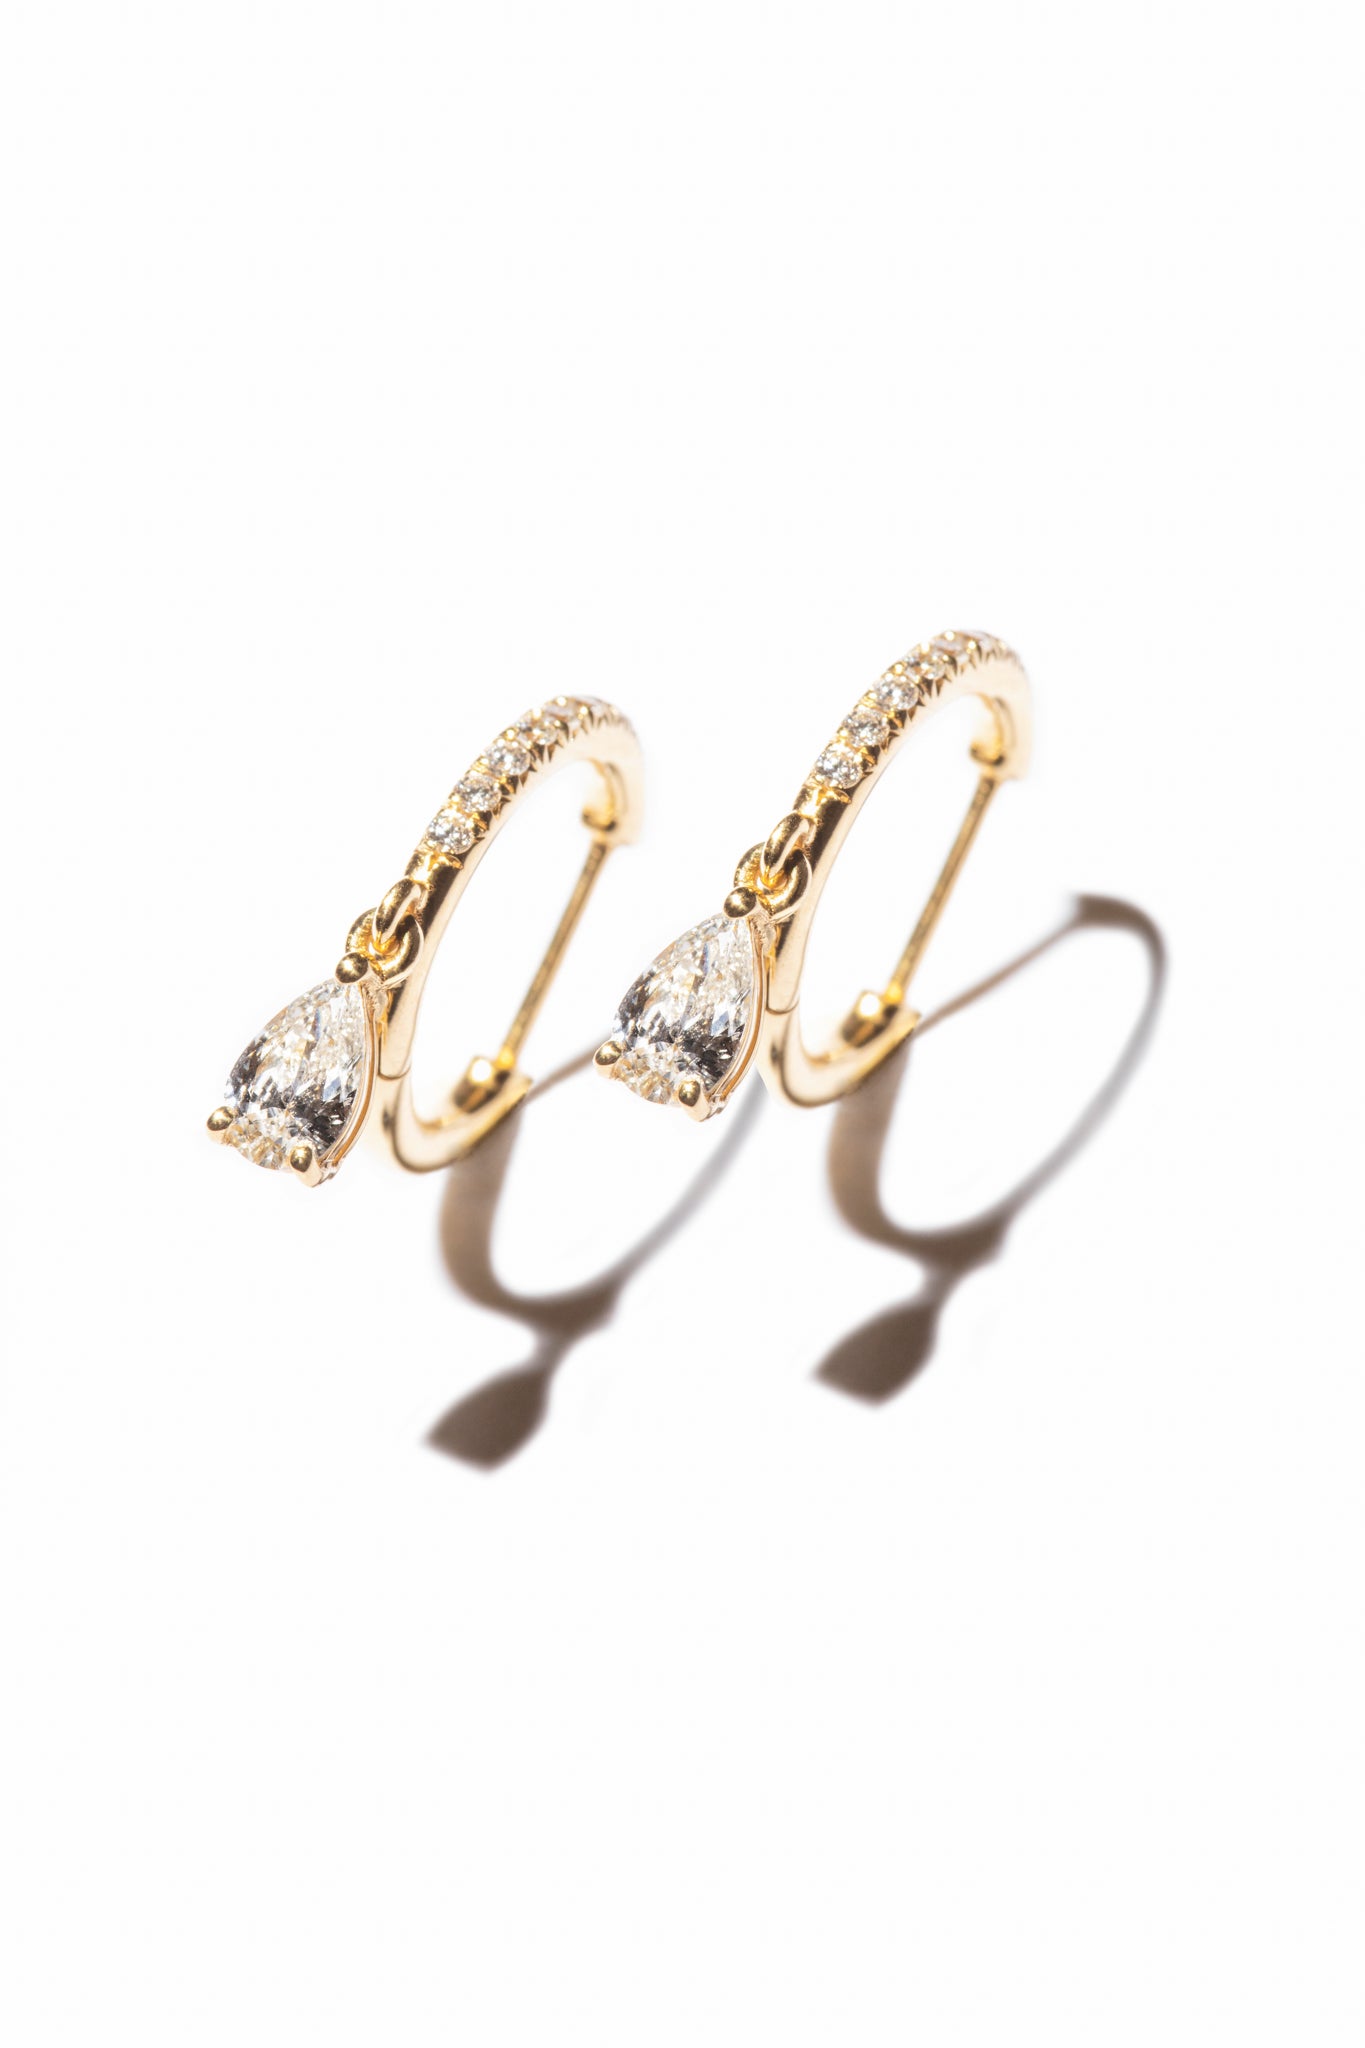 Pear Drop Pavé Huggies, elegant diamond earrings that are made of sustainable lab-grown diamonds and 18k solid gold. 